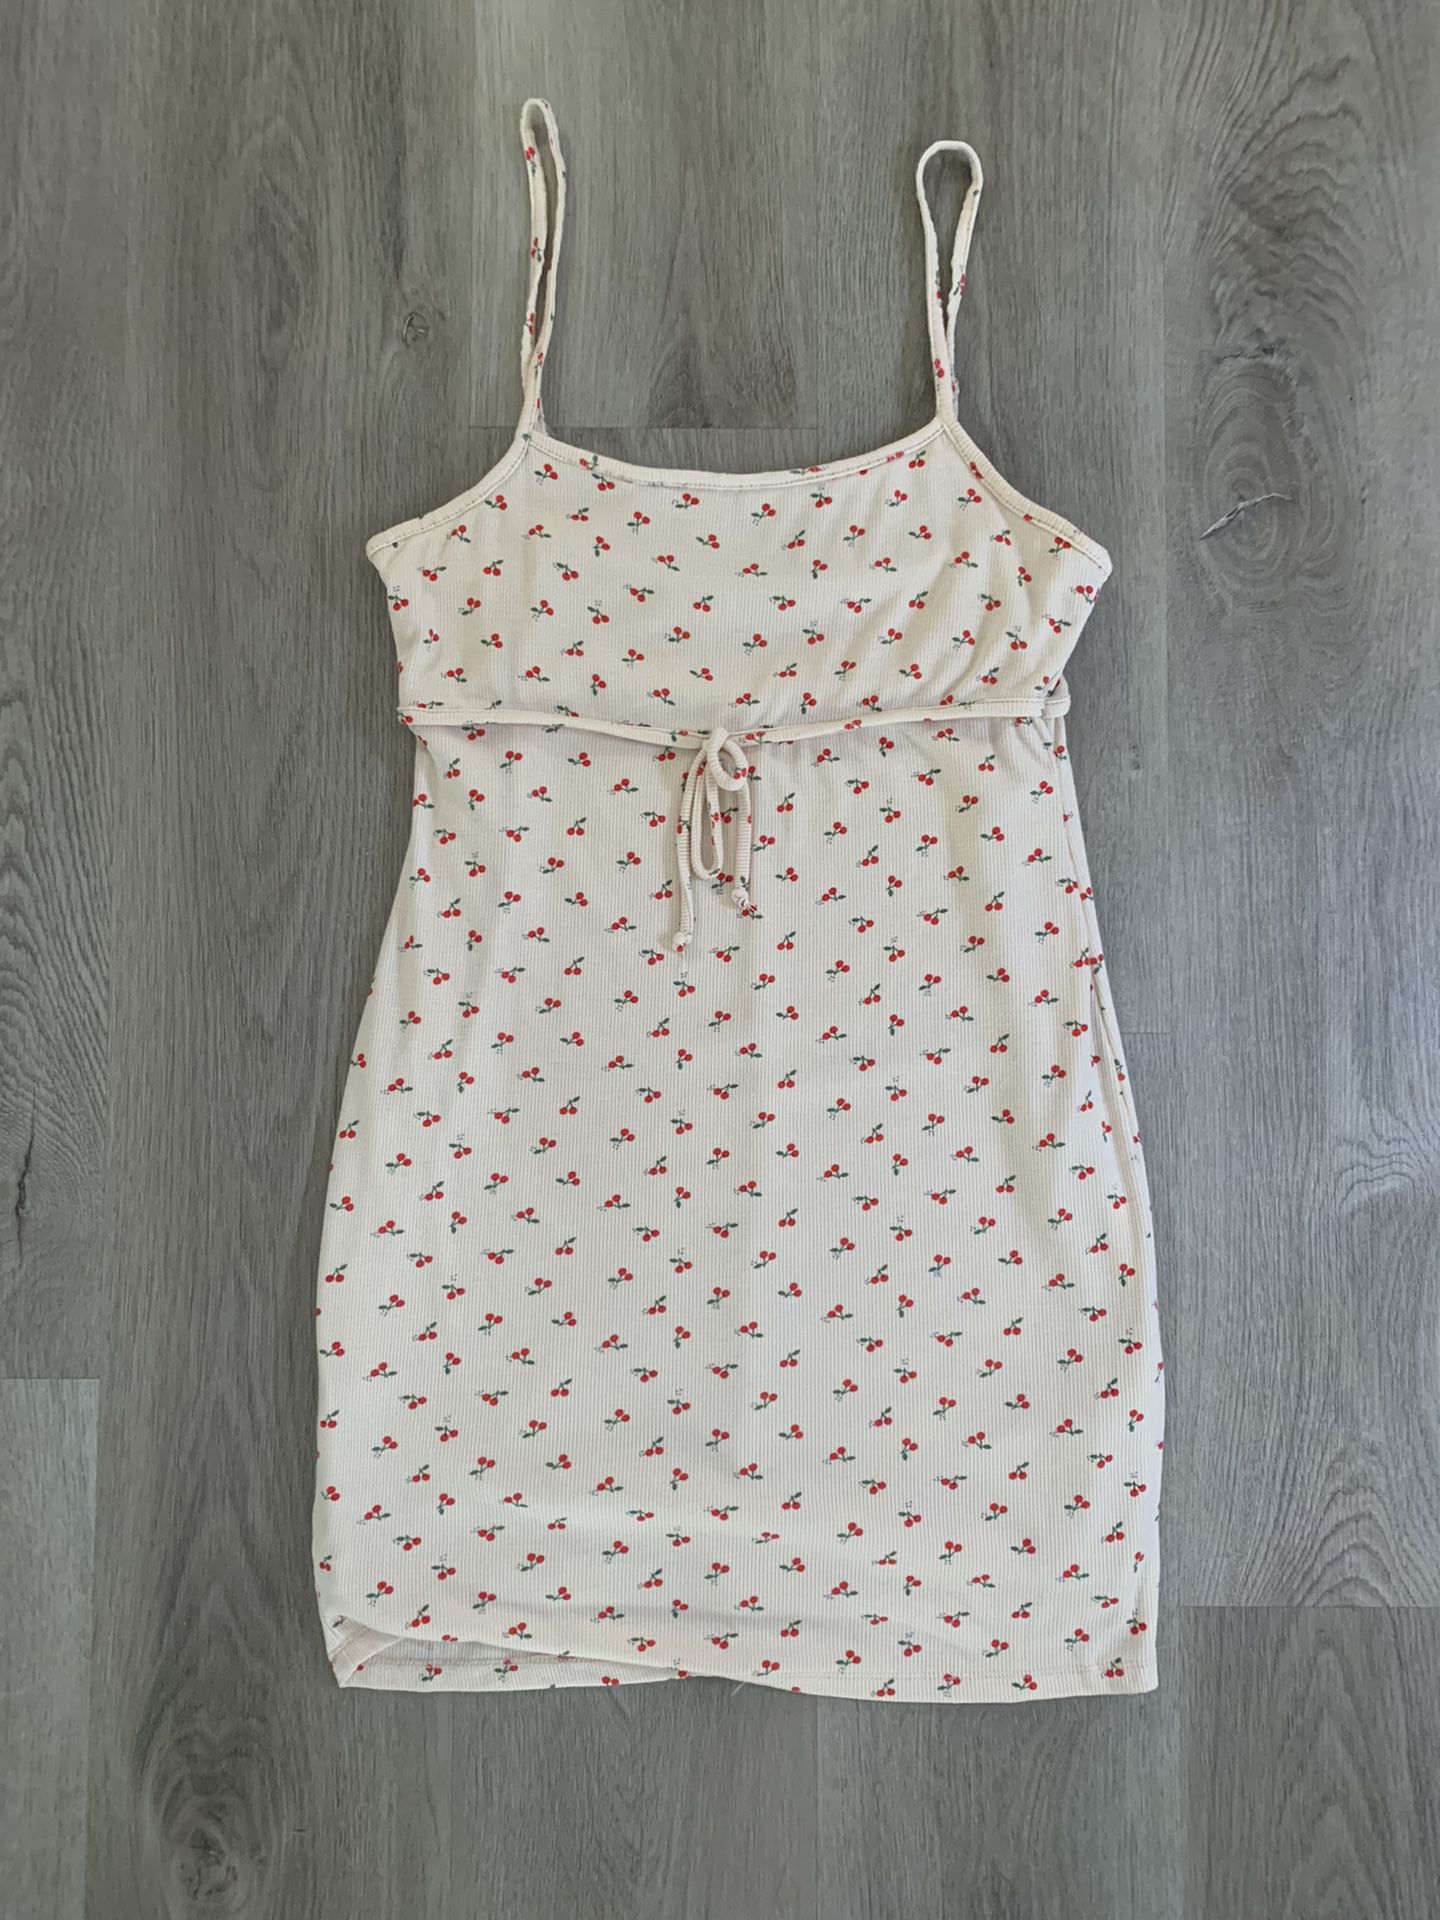 Urban Outfitters Cherry Sundress